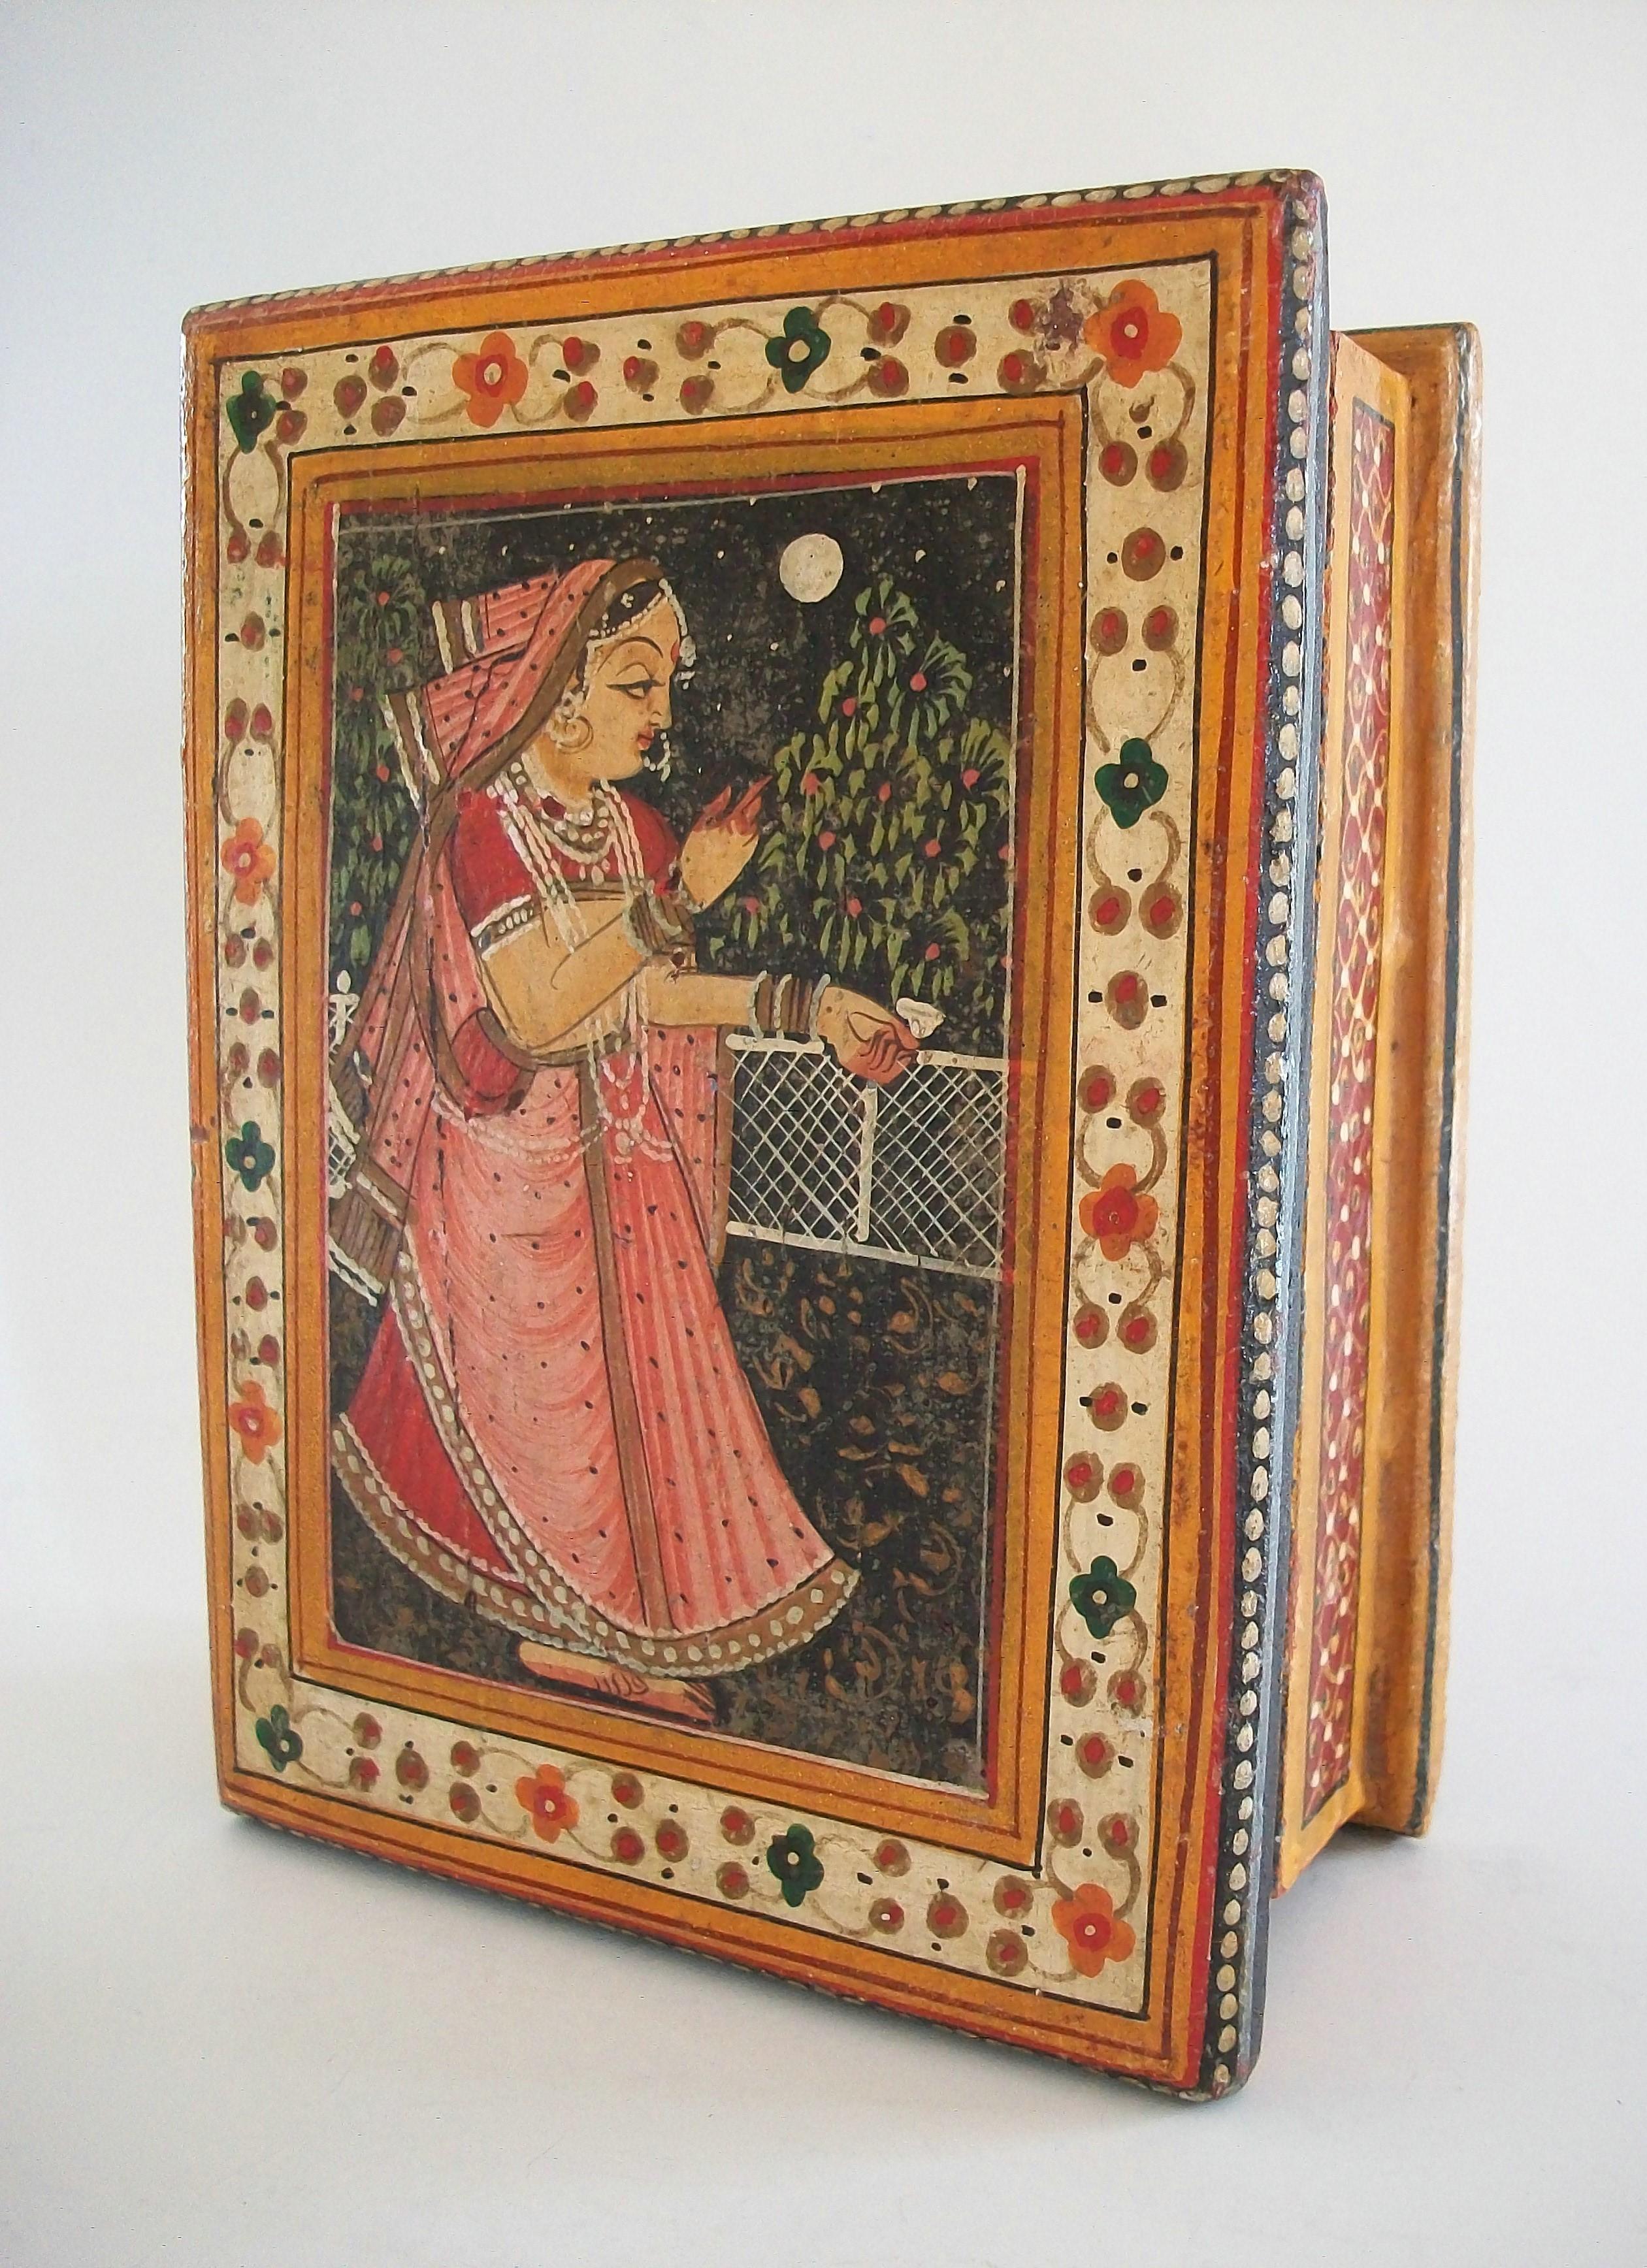 Vintage South Asian Folk Art Hand Painted Wooden Box - India - Mid 20th Century In Good Condition For Sale In Chatham, ON